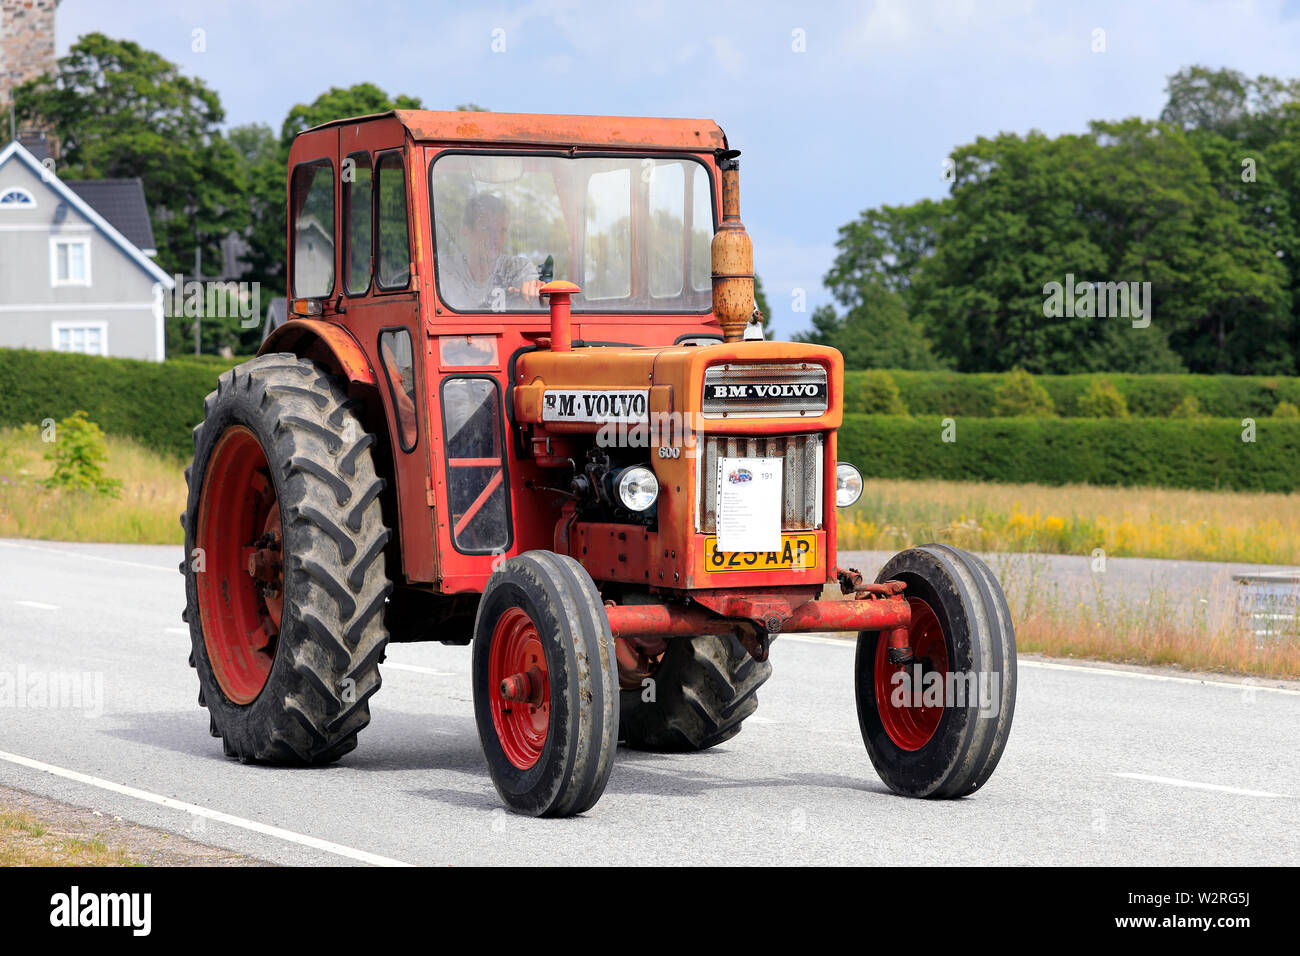 Kimito,Finland. July 6,2019. Red Volvo BM 600 tractor on Kimito Tractorkavalkad, Tractor Cavalcade, yearly tractor parade. 600 was introduced in 1967. Stock Photo